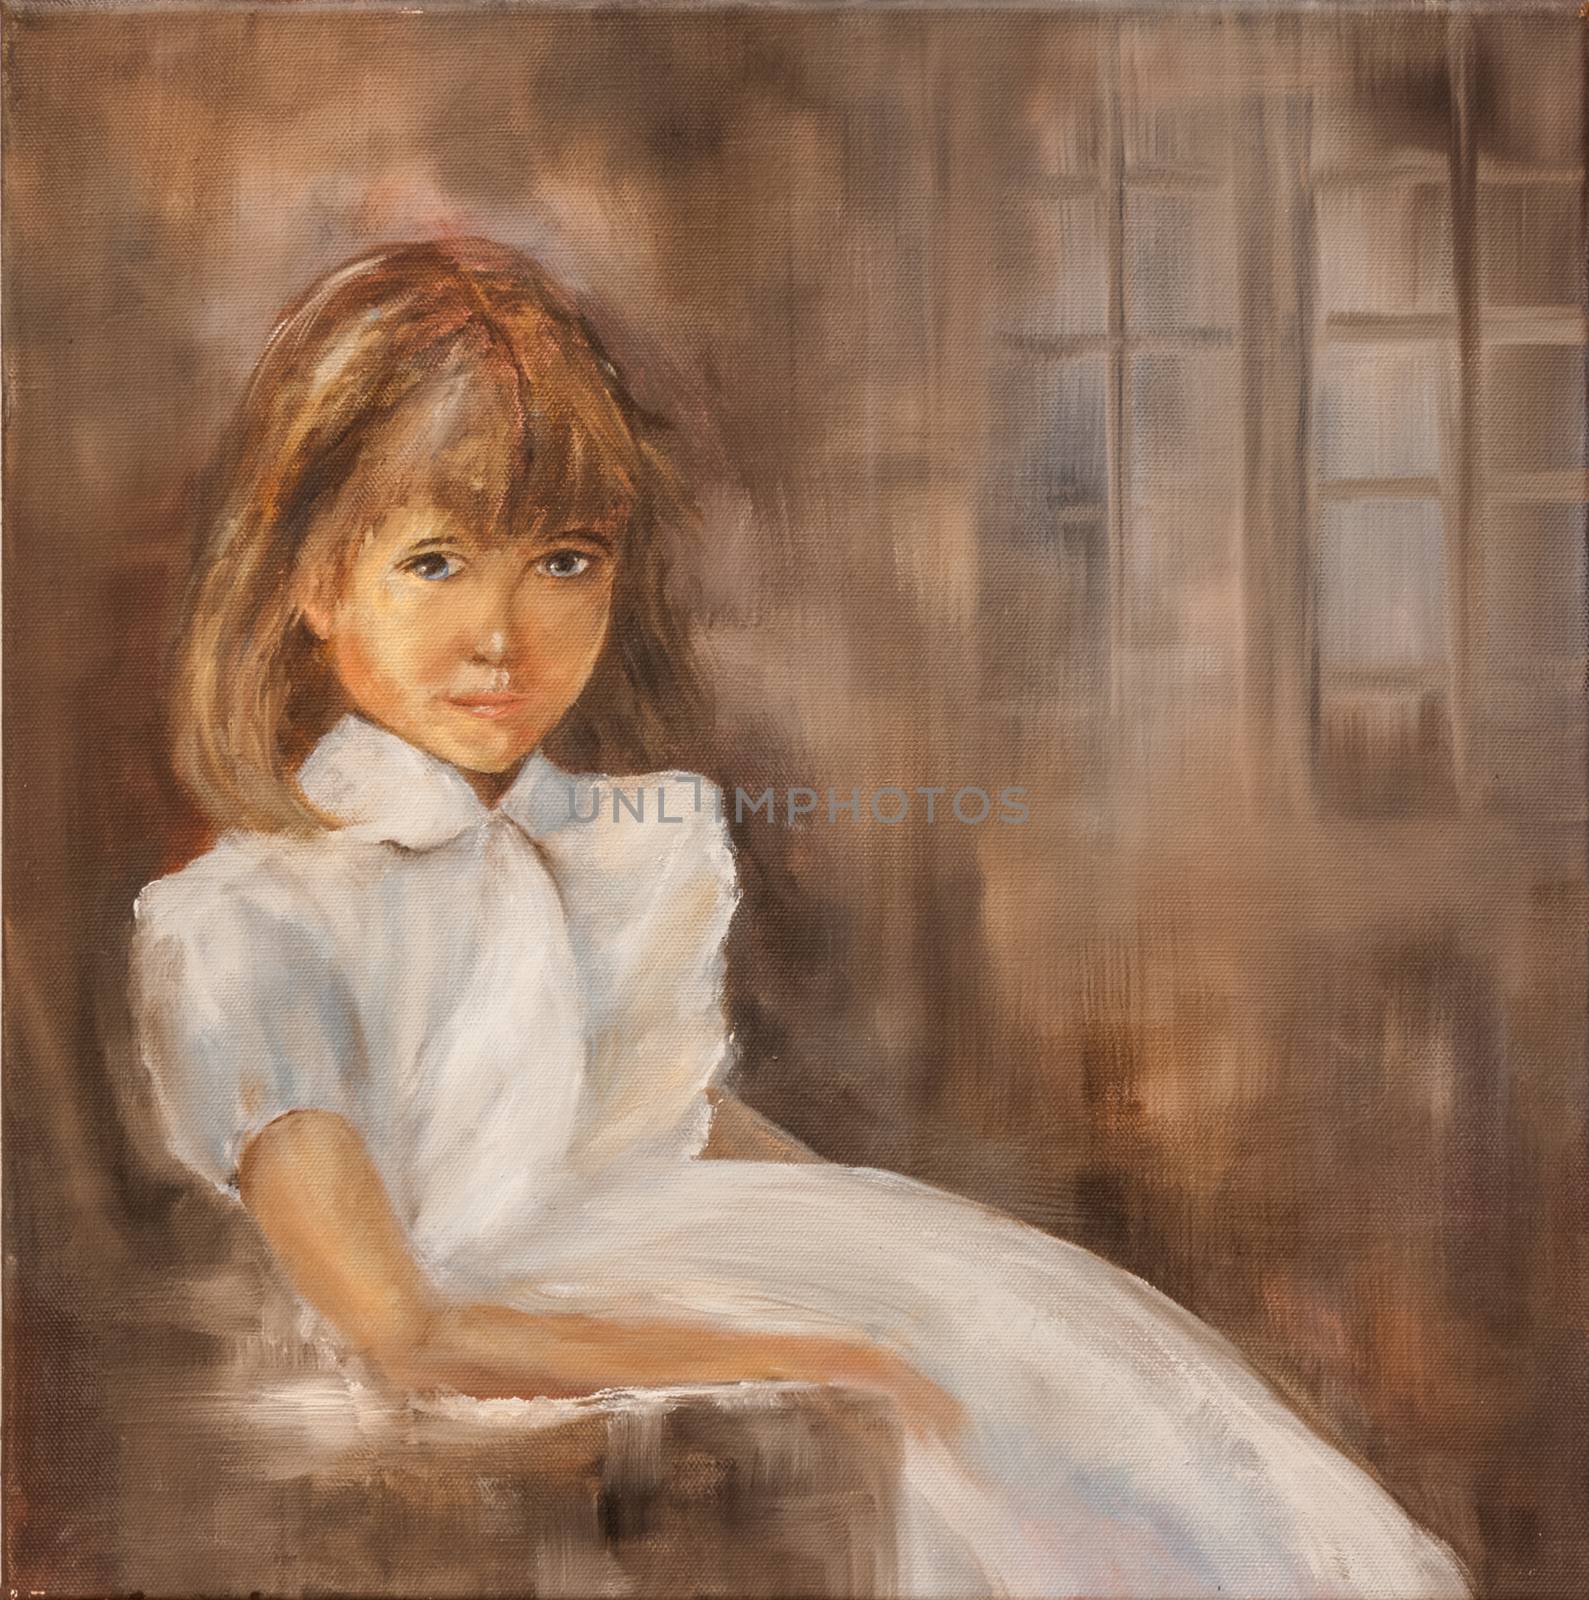 Portrait of a young lady. She is sitting in a chair wearing a white dress. Painted with oil on canvas. by QQJXw824zEfXDVTP9u